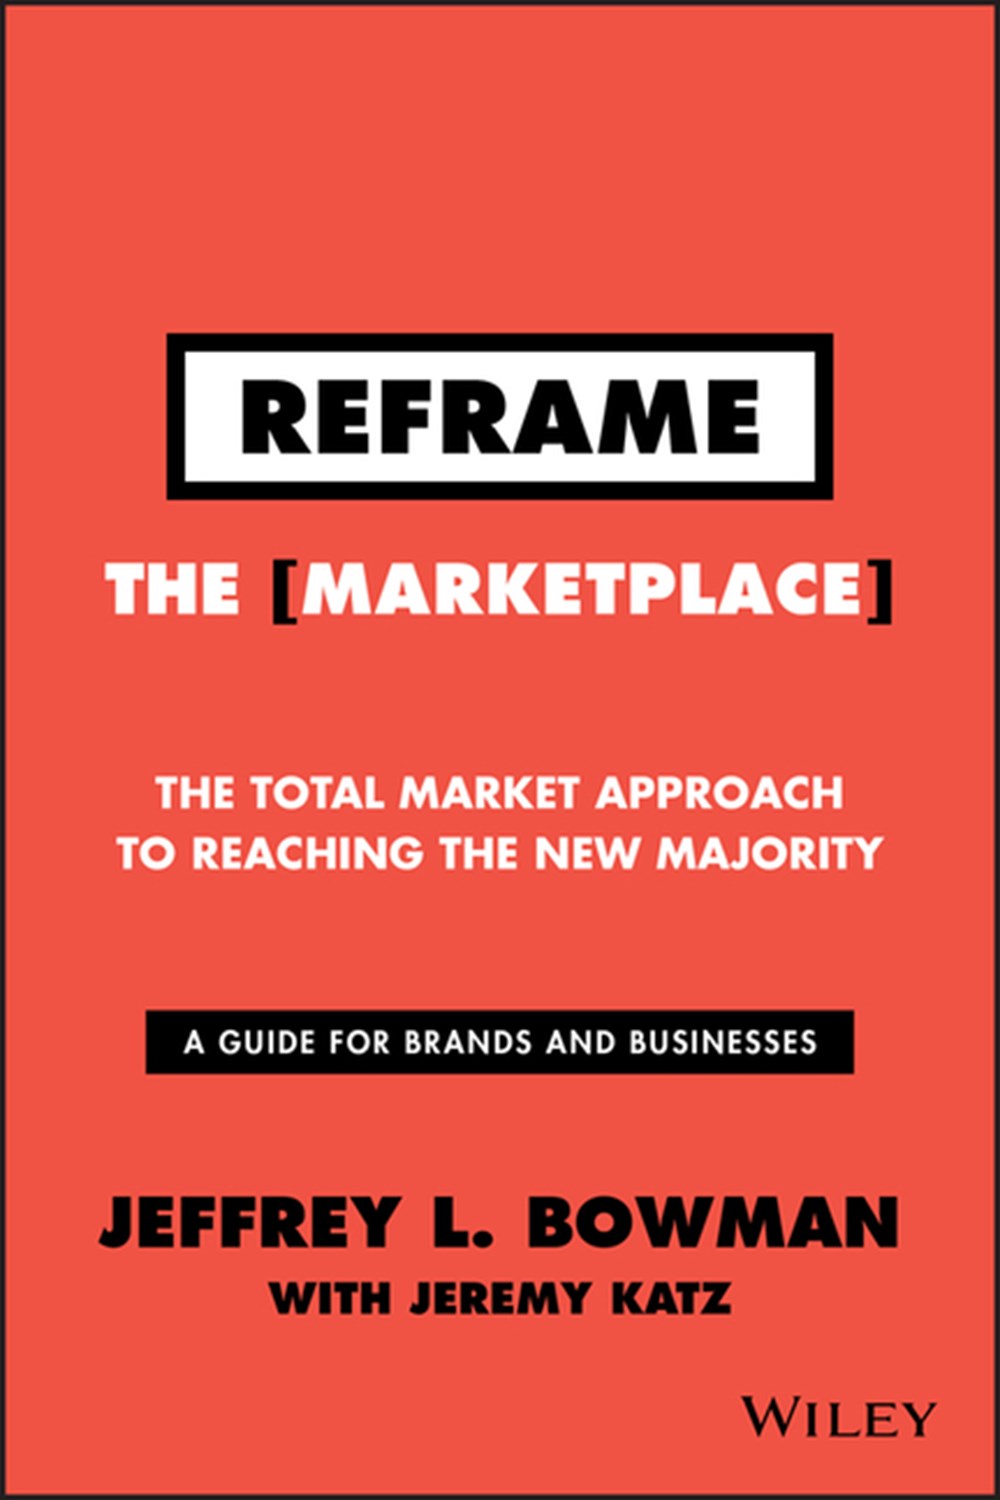 Reframe the Marketplace The Total Market Approach to Reaching the New Majority